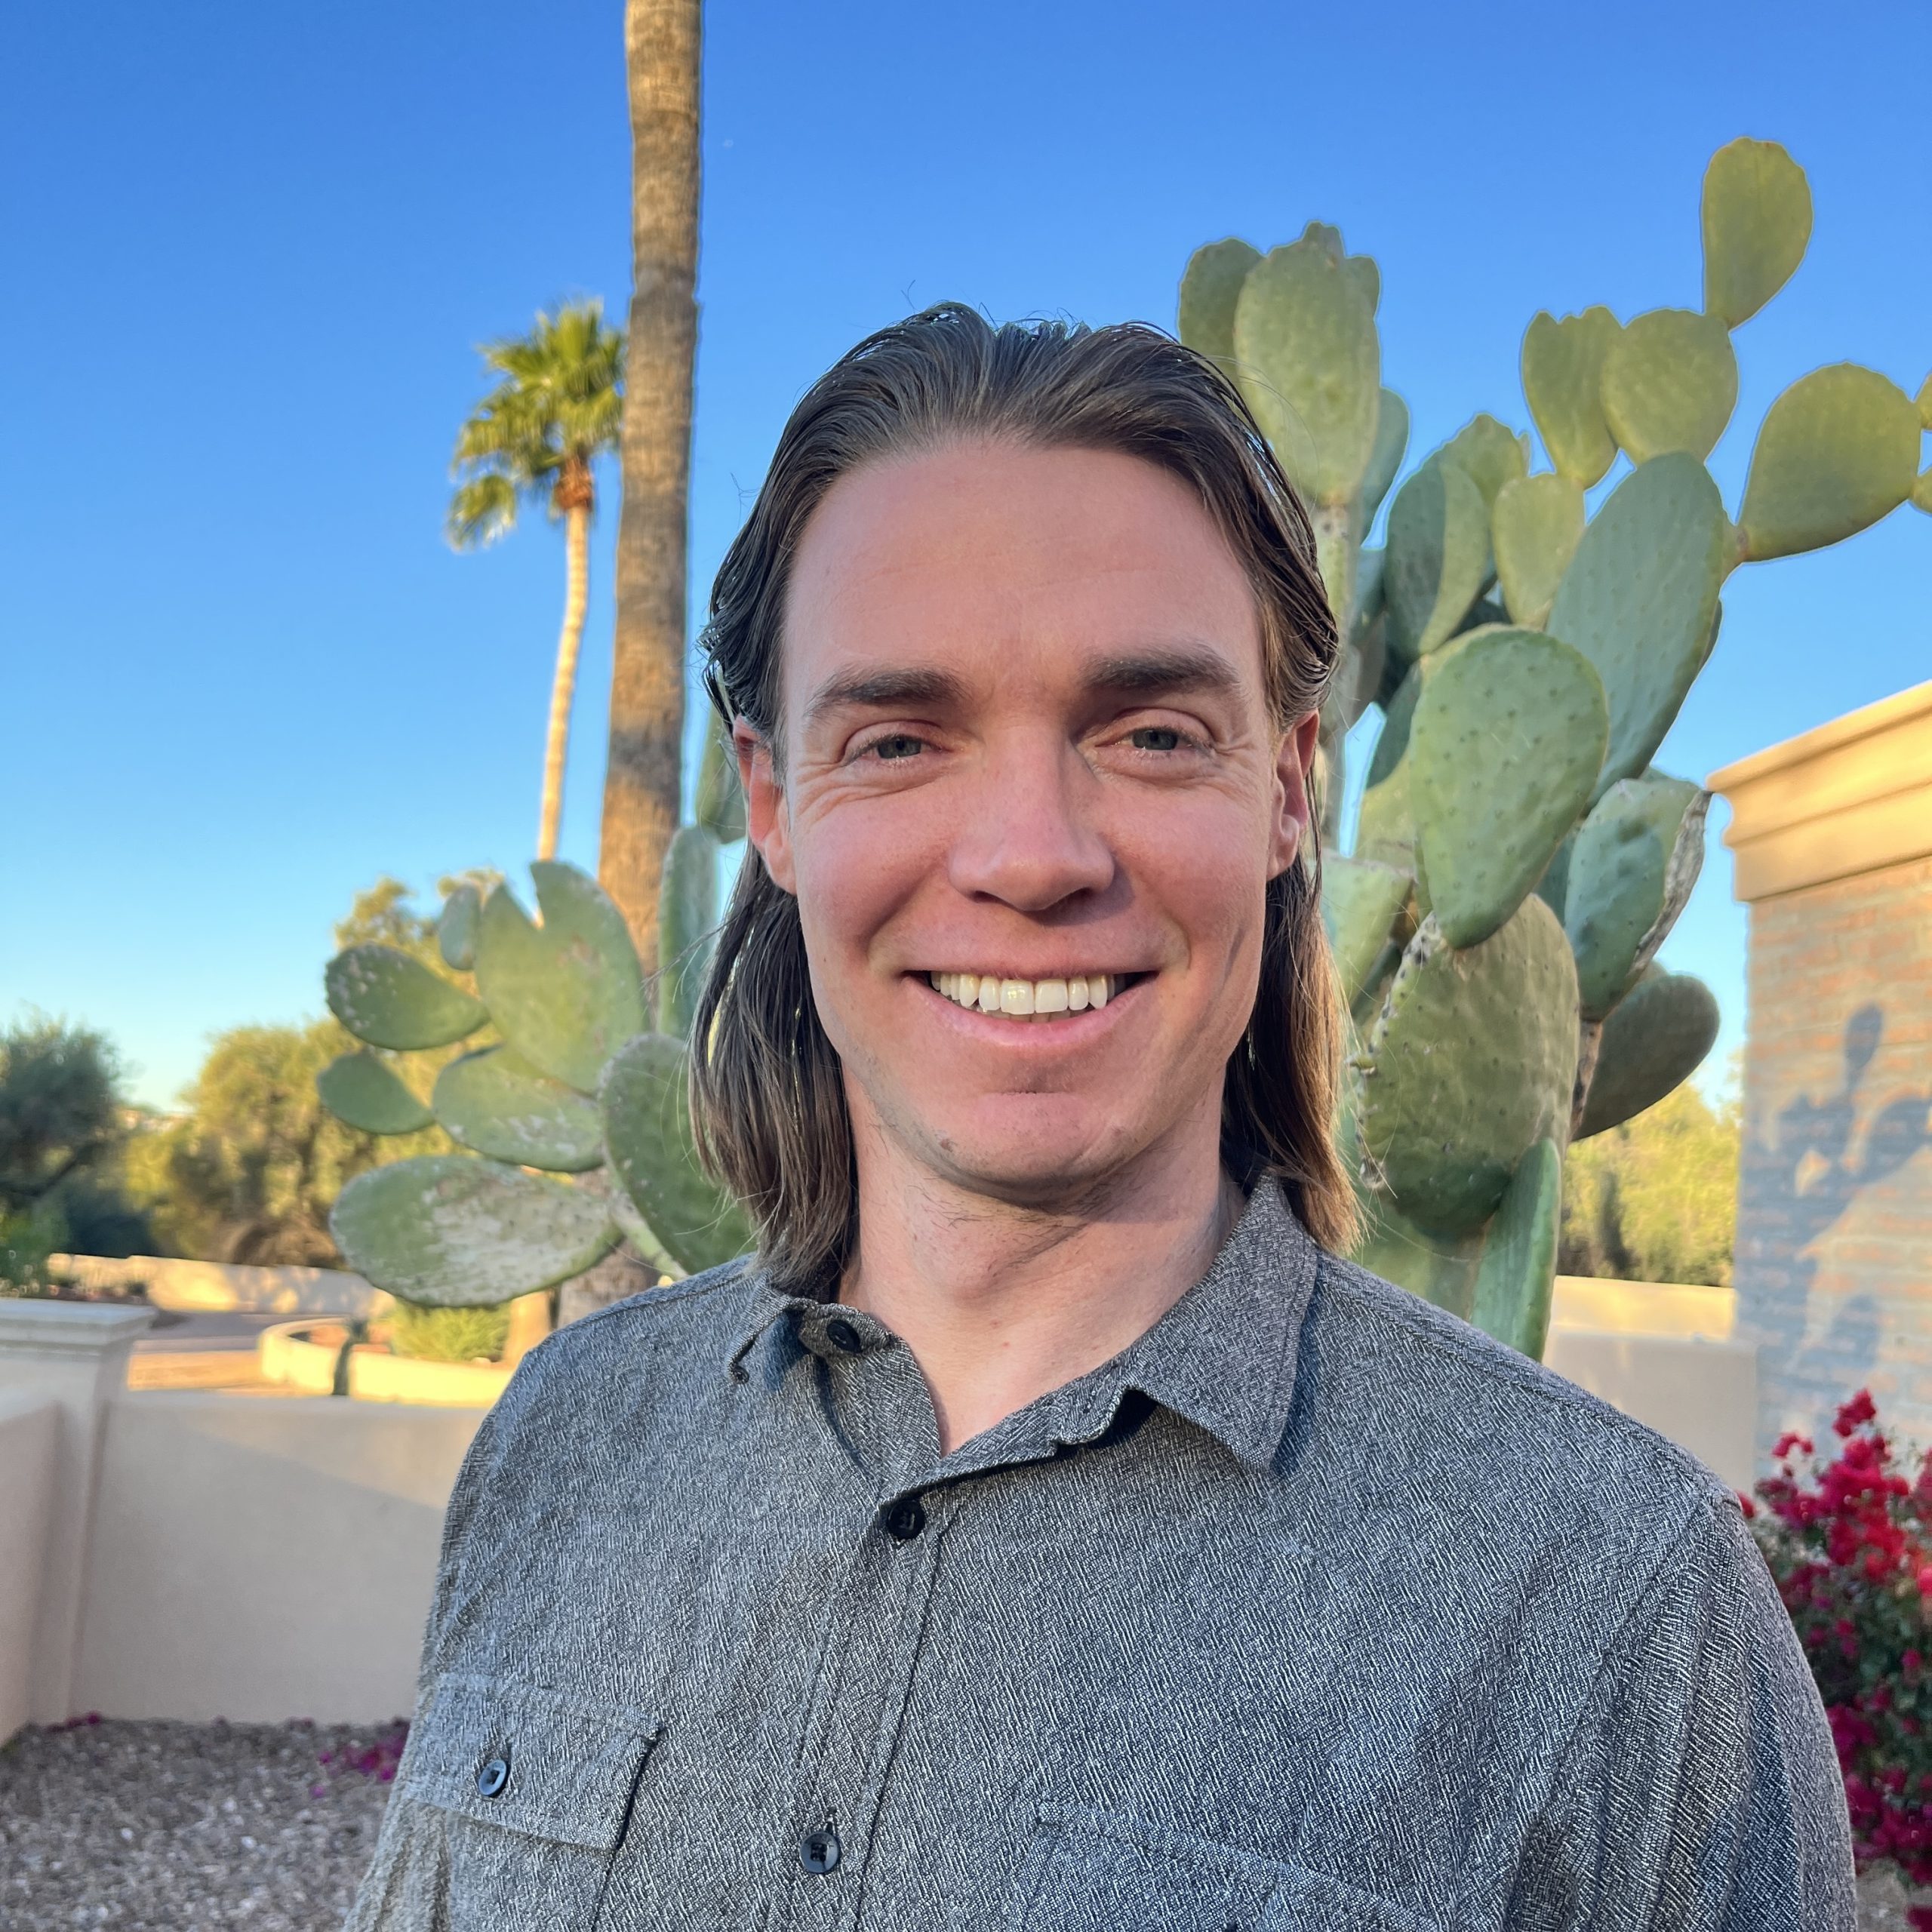 A man with long hair standing in front of a cactus.